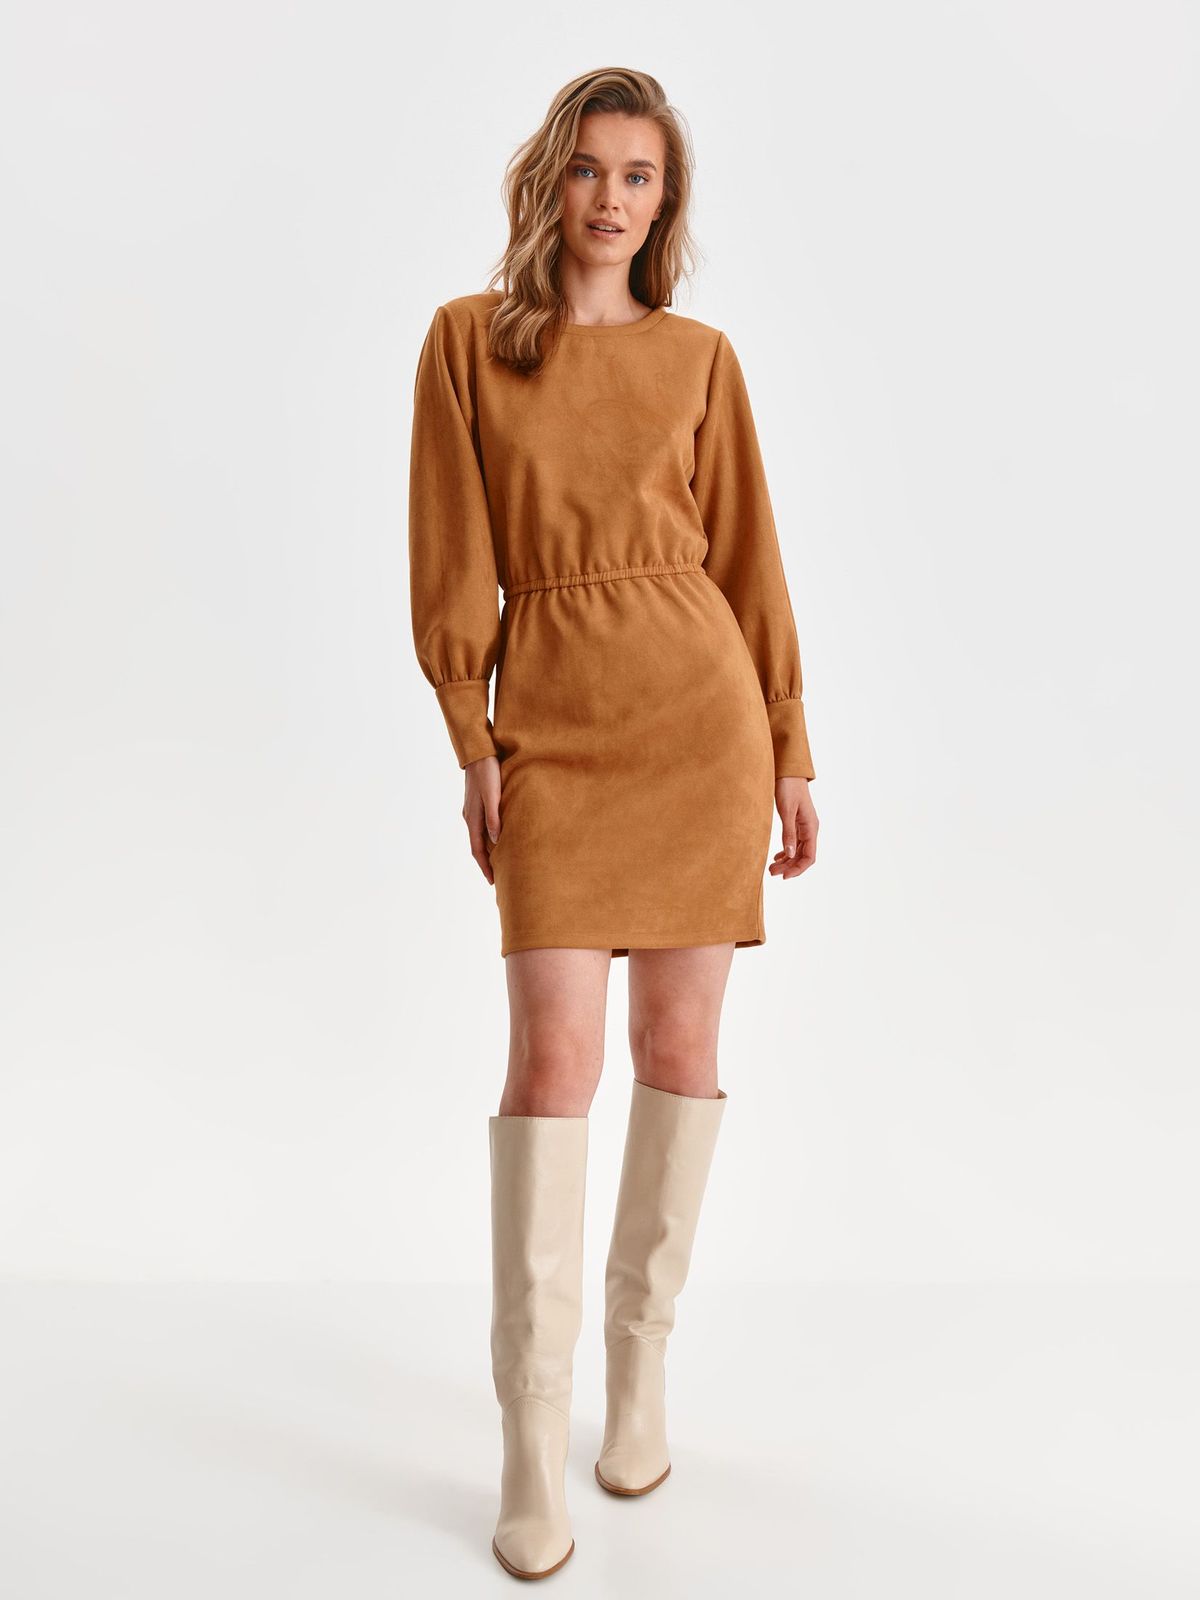 Lightbrown dress from ecological leather pencil long sleeved